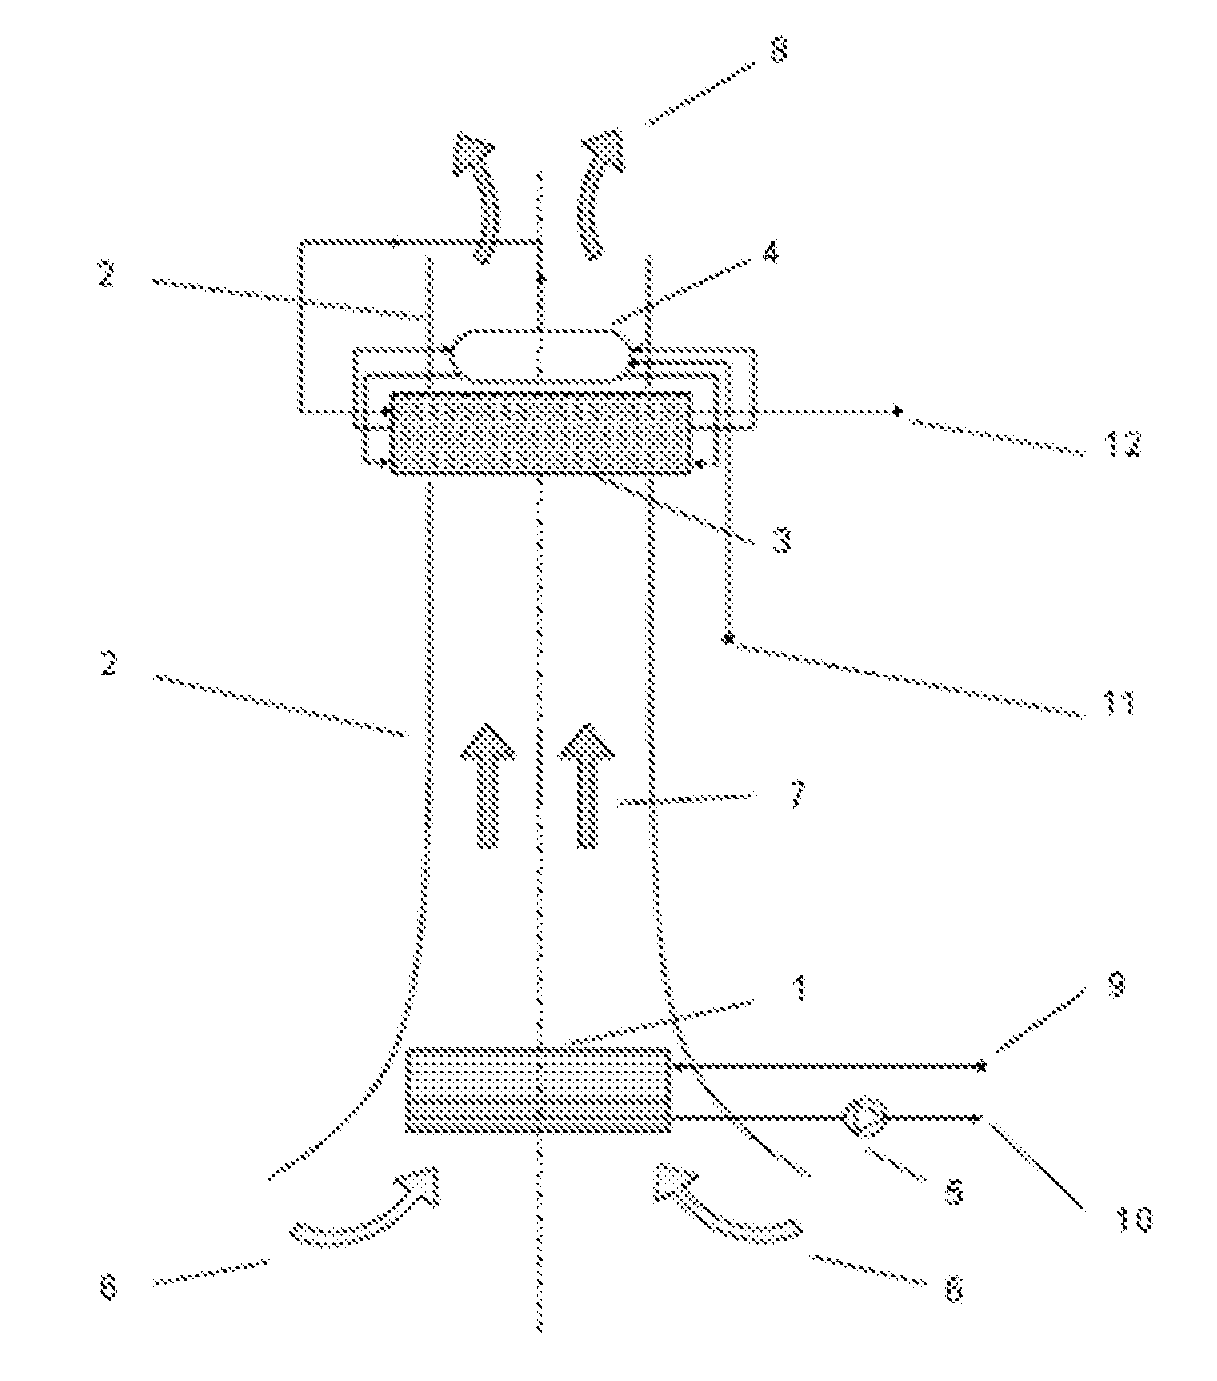 Solar concentrator plant using natural-draught tower technology and operating method